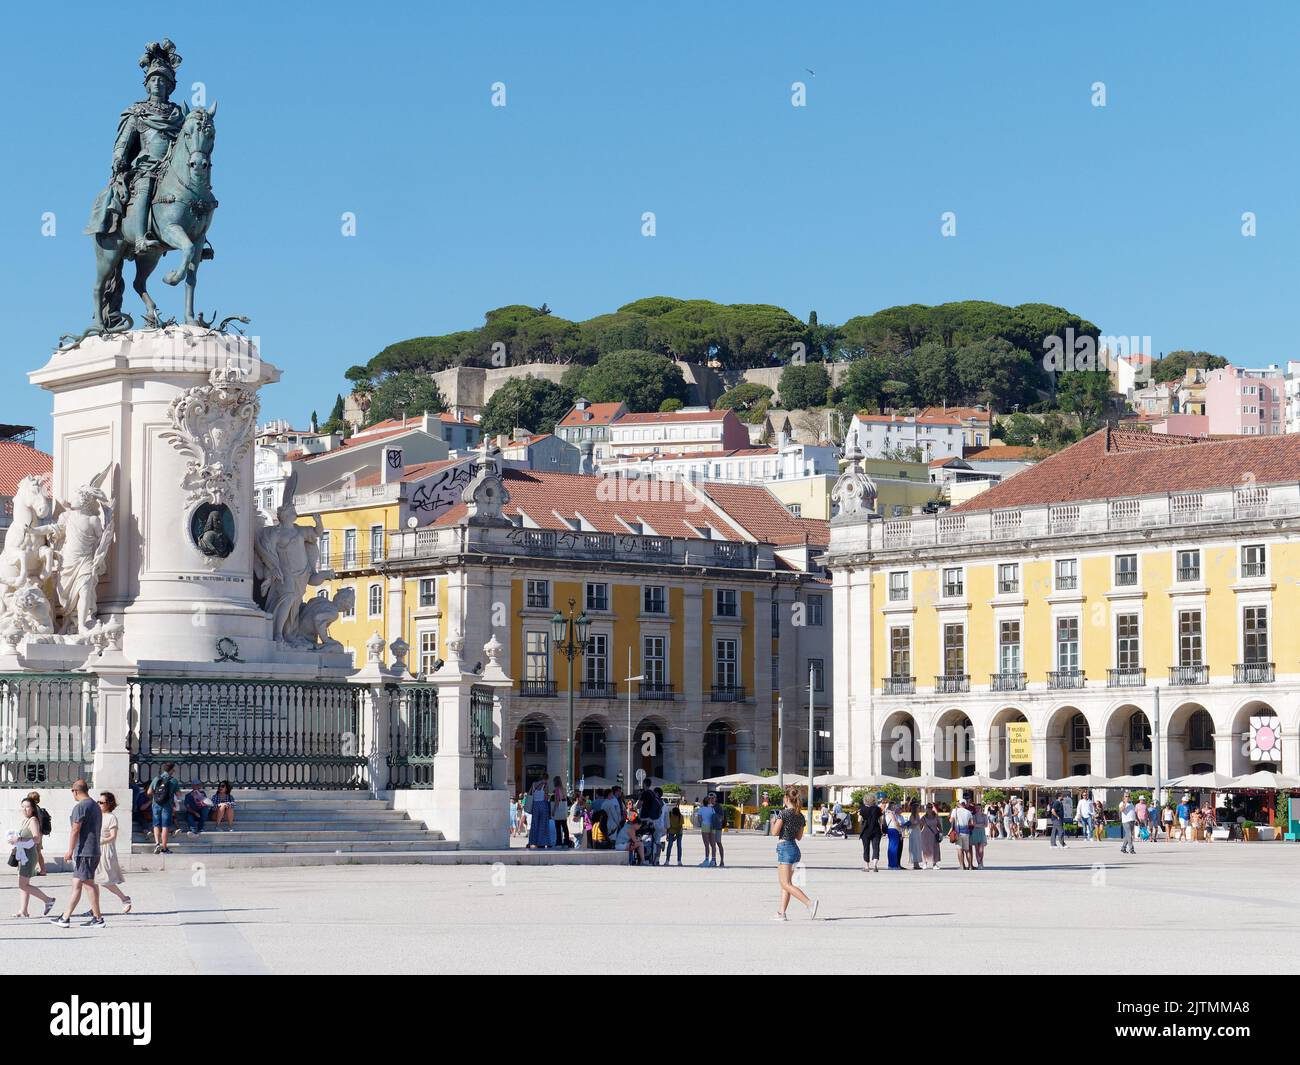 Praça do Comércio (Commerce Square) with equestrian statue and Castle of St. George on the hilltop behind. Lisbon, Portugal Stock Photo